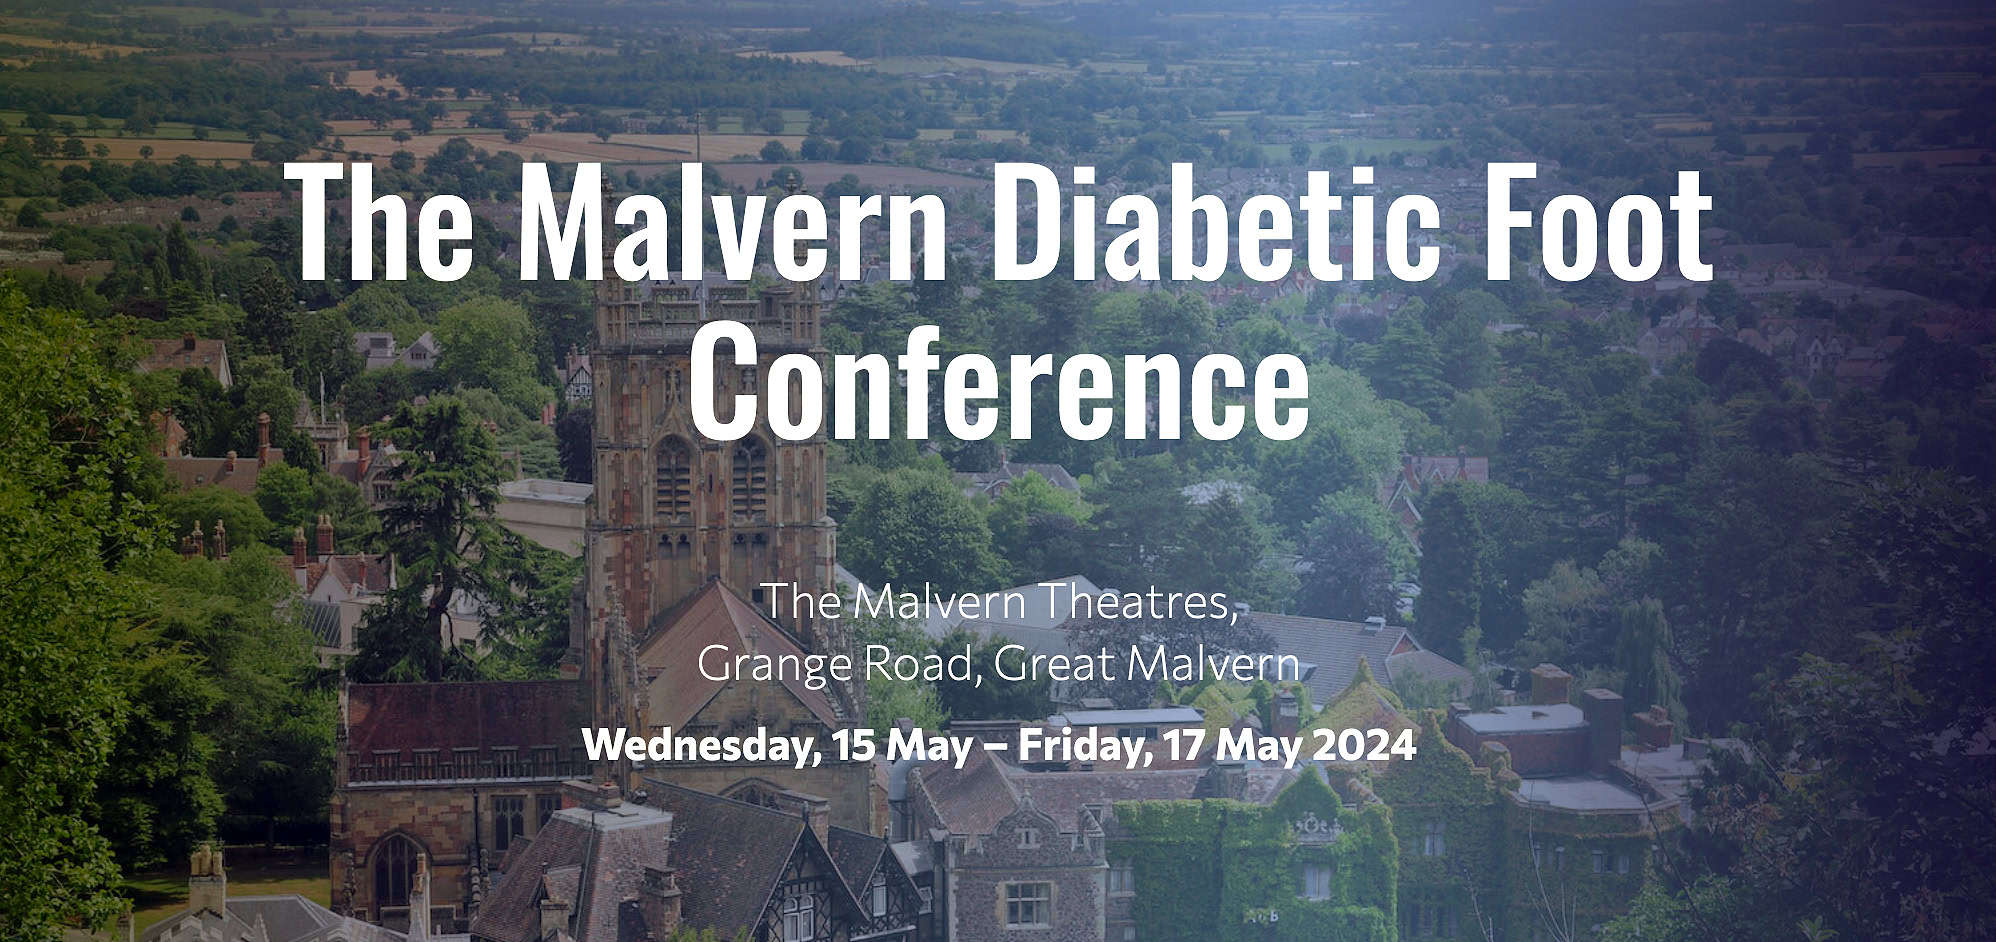 the Malvern Diabetic foot Conference